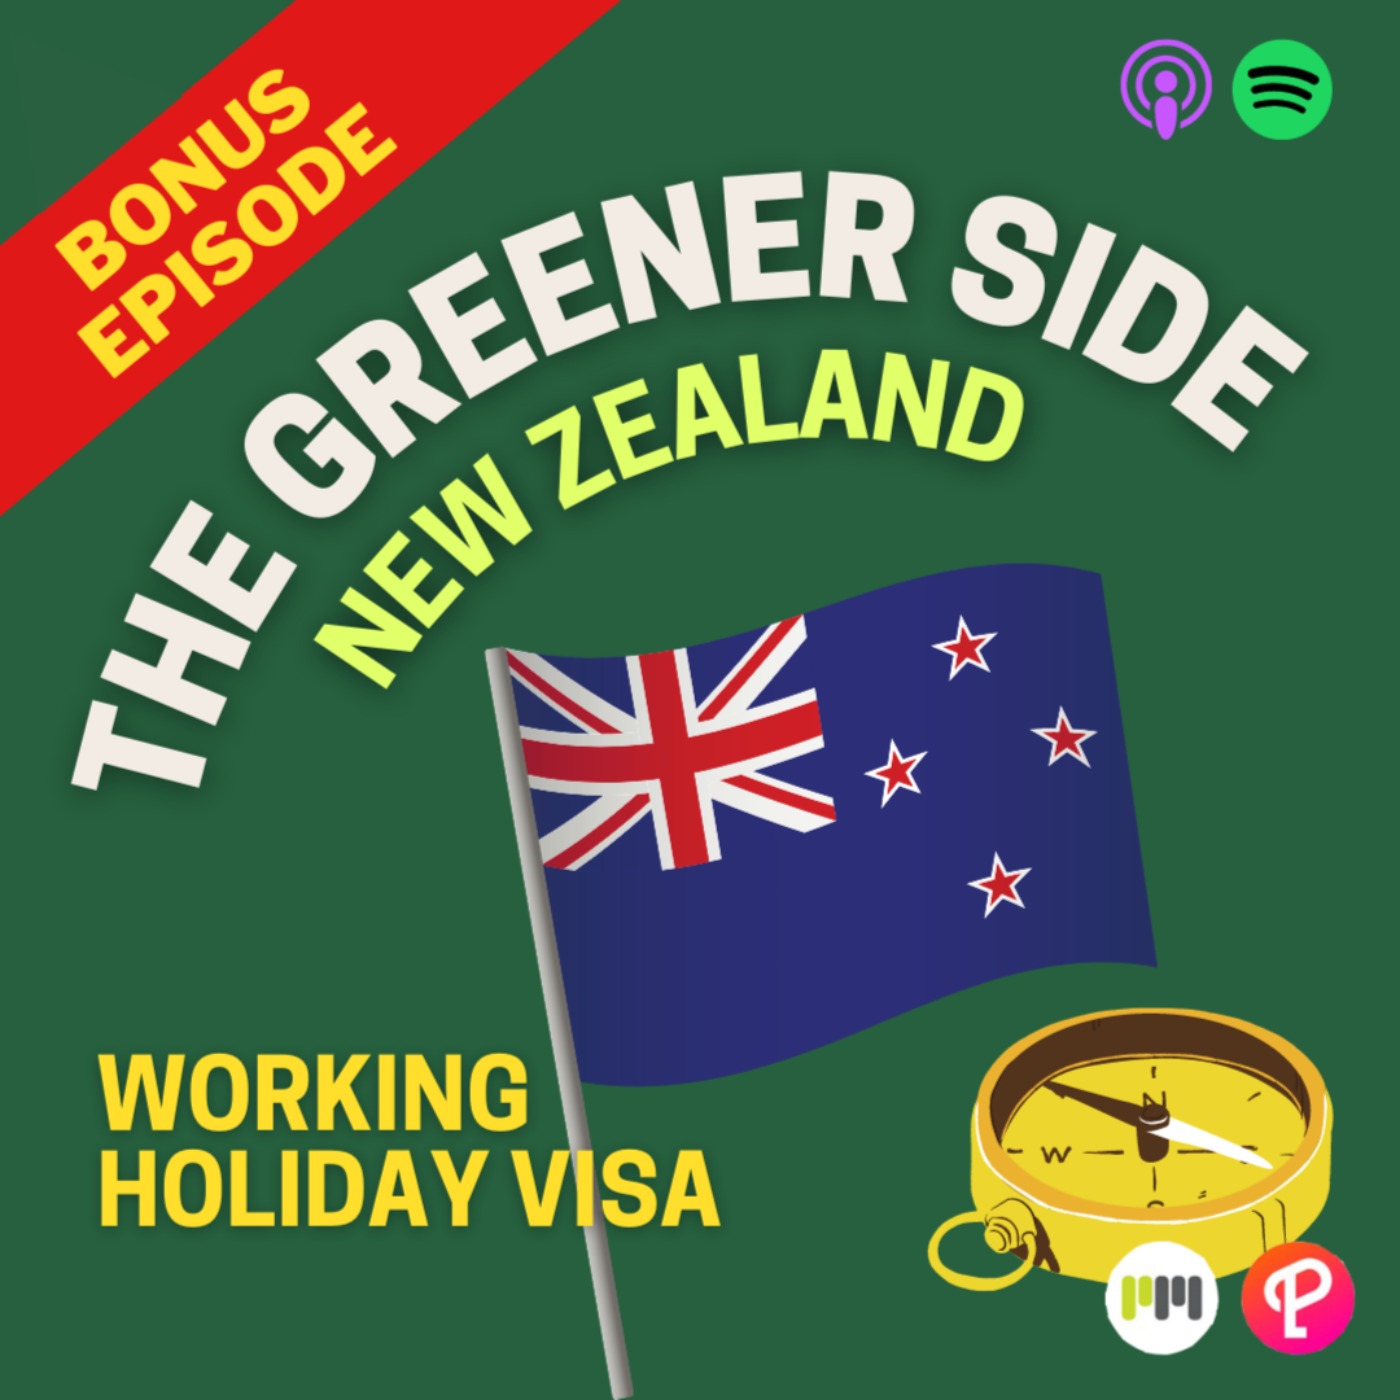 BONUS: New Zealand's working holiday visa opens this March 31! How to apply!